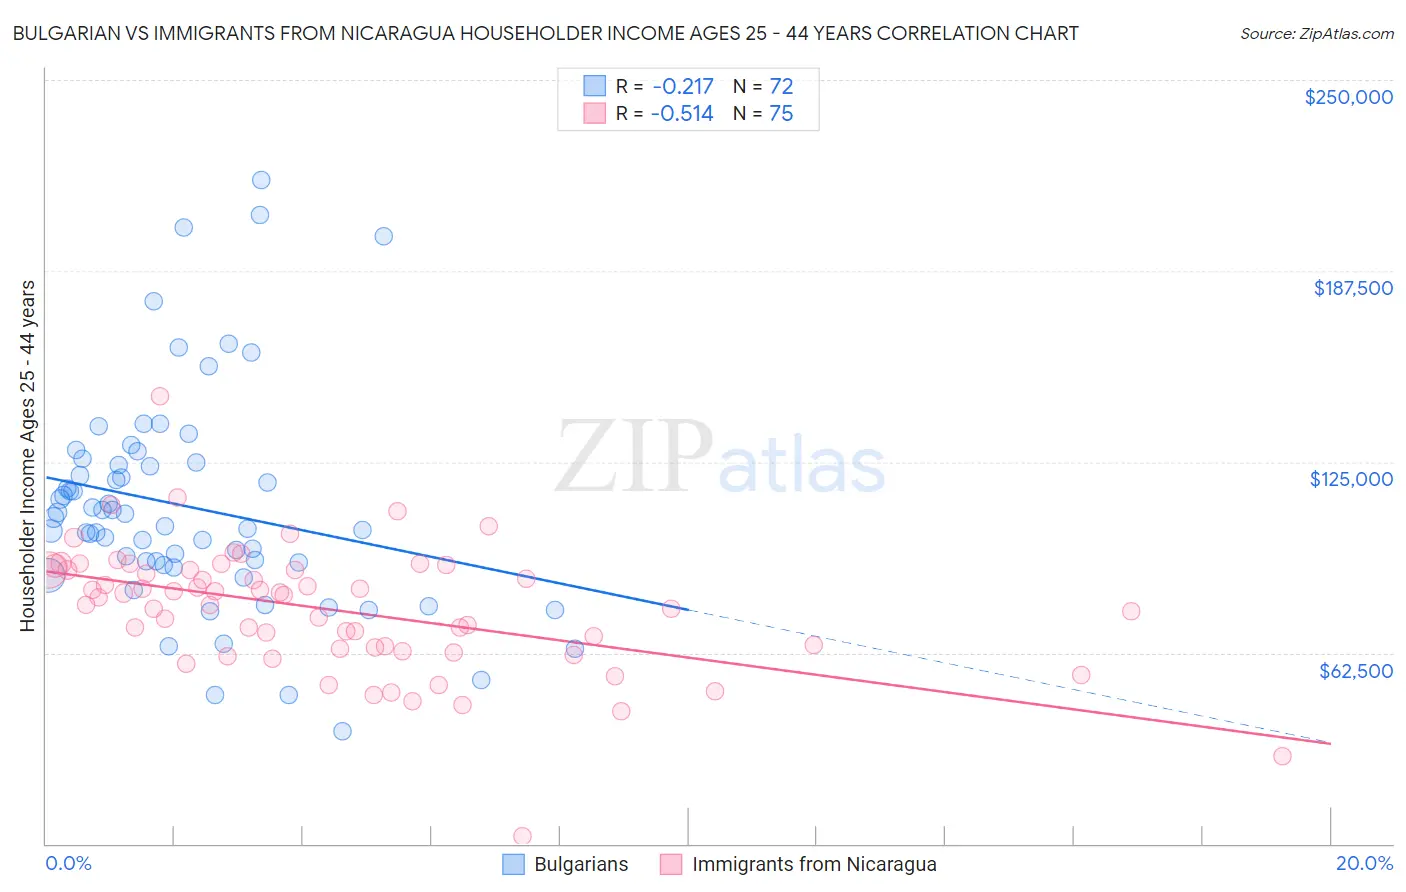 Bulgarian vs Immigrants from Nicaragua Householder Income Ages 25 - 44 years